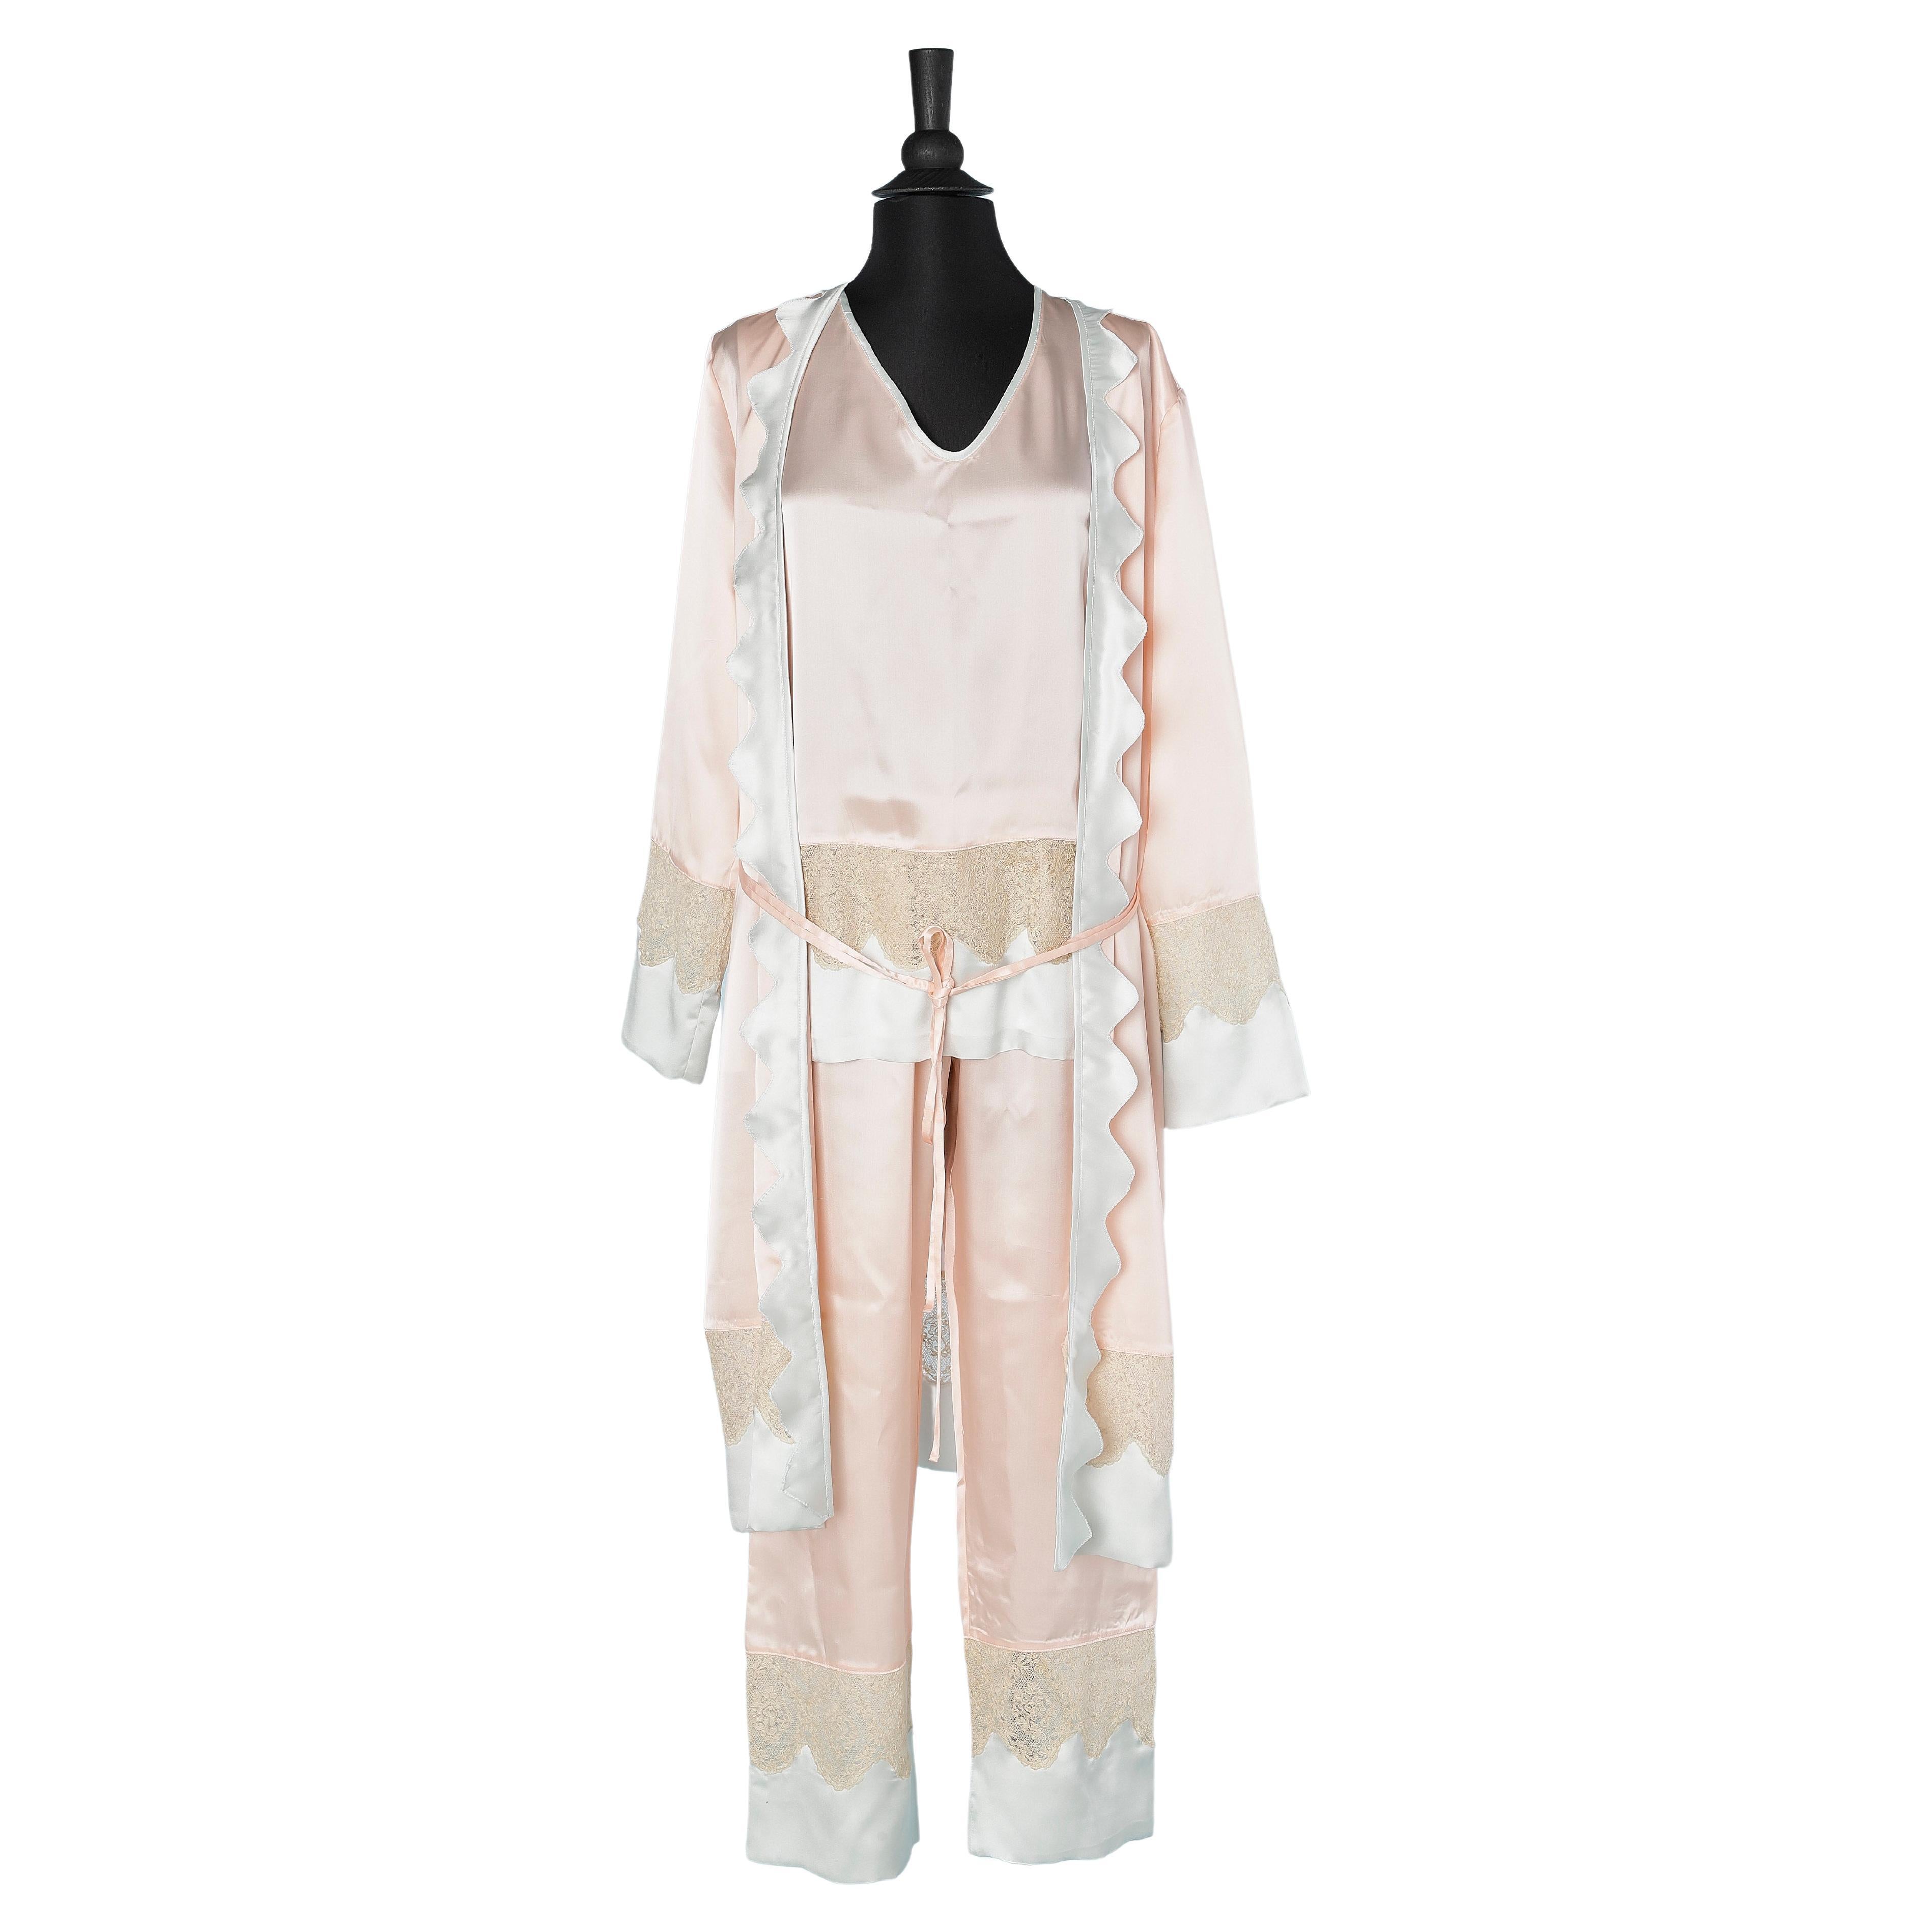 Robe and pyjamas in pastel silk satin and lace appliqué  Circa 1930 For Sale